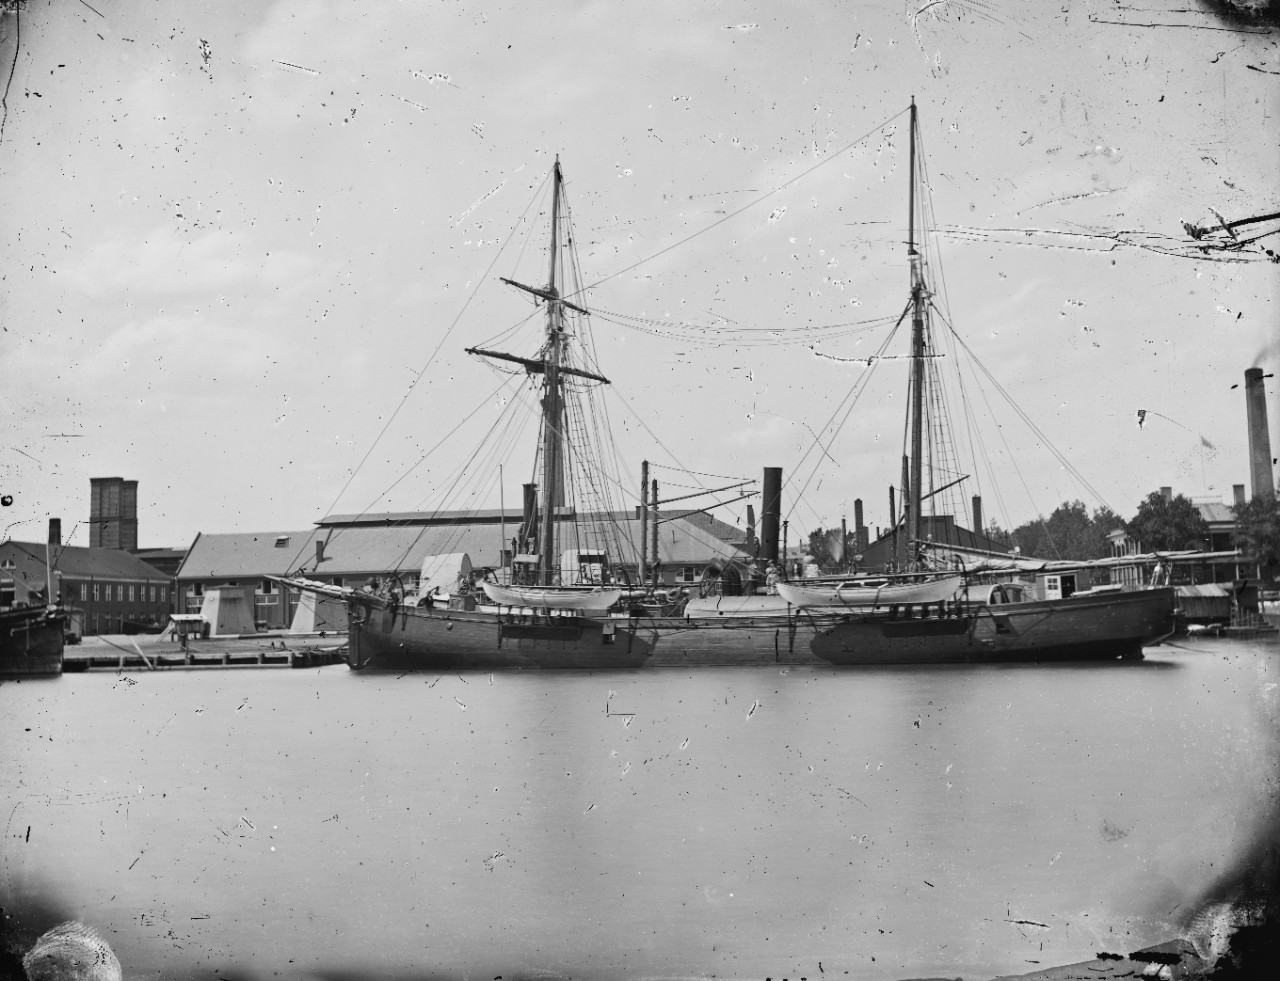 LC-DIG-CWPBH-03348:   USS Polaris at the Washington Navy Yard, Washington, D.C., 1865-1872.   Polaris is known for her missions to the Arctic.   Courtesy of the Library of Congress.   